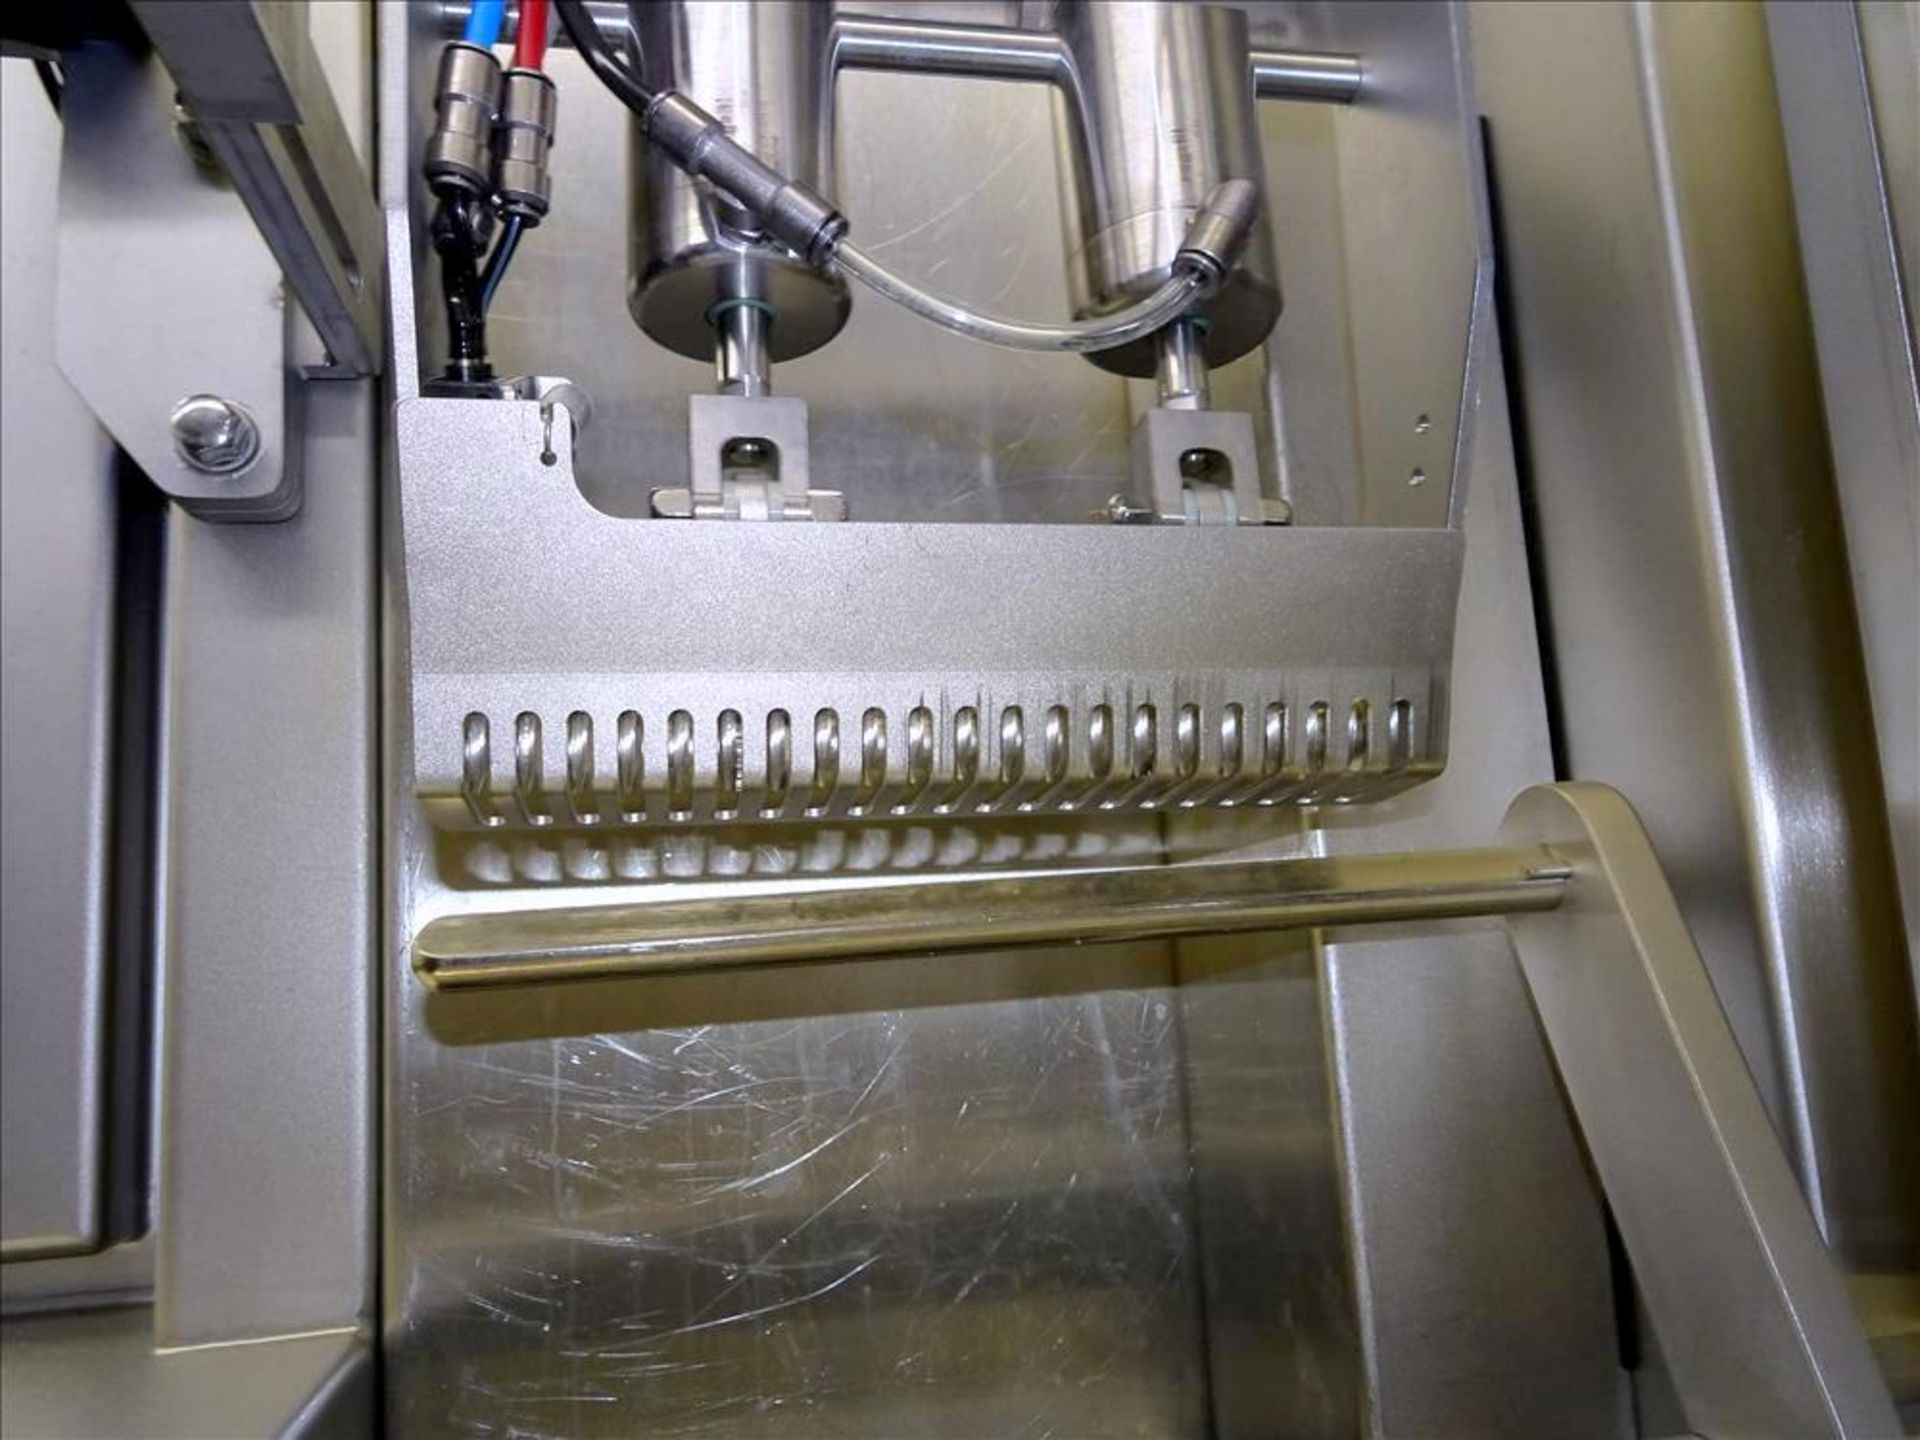 Treif Slicer, Model Divider 660+. 320 x 130 mm / 280 x 160 mm infeed chamber. Serial # 660000 - Image 13 of 16